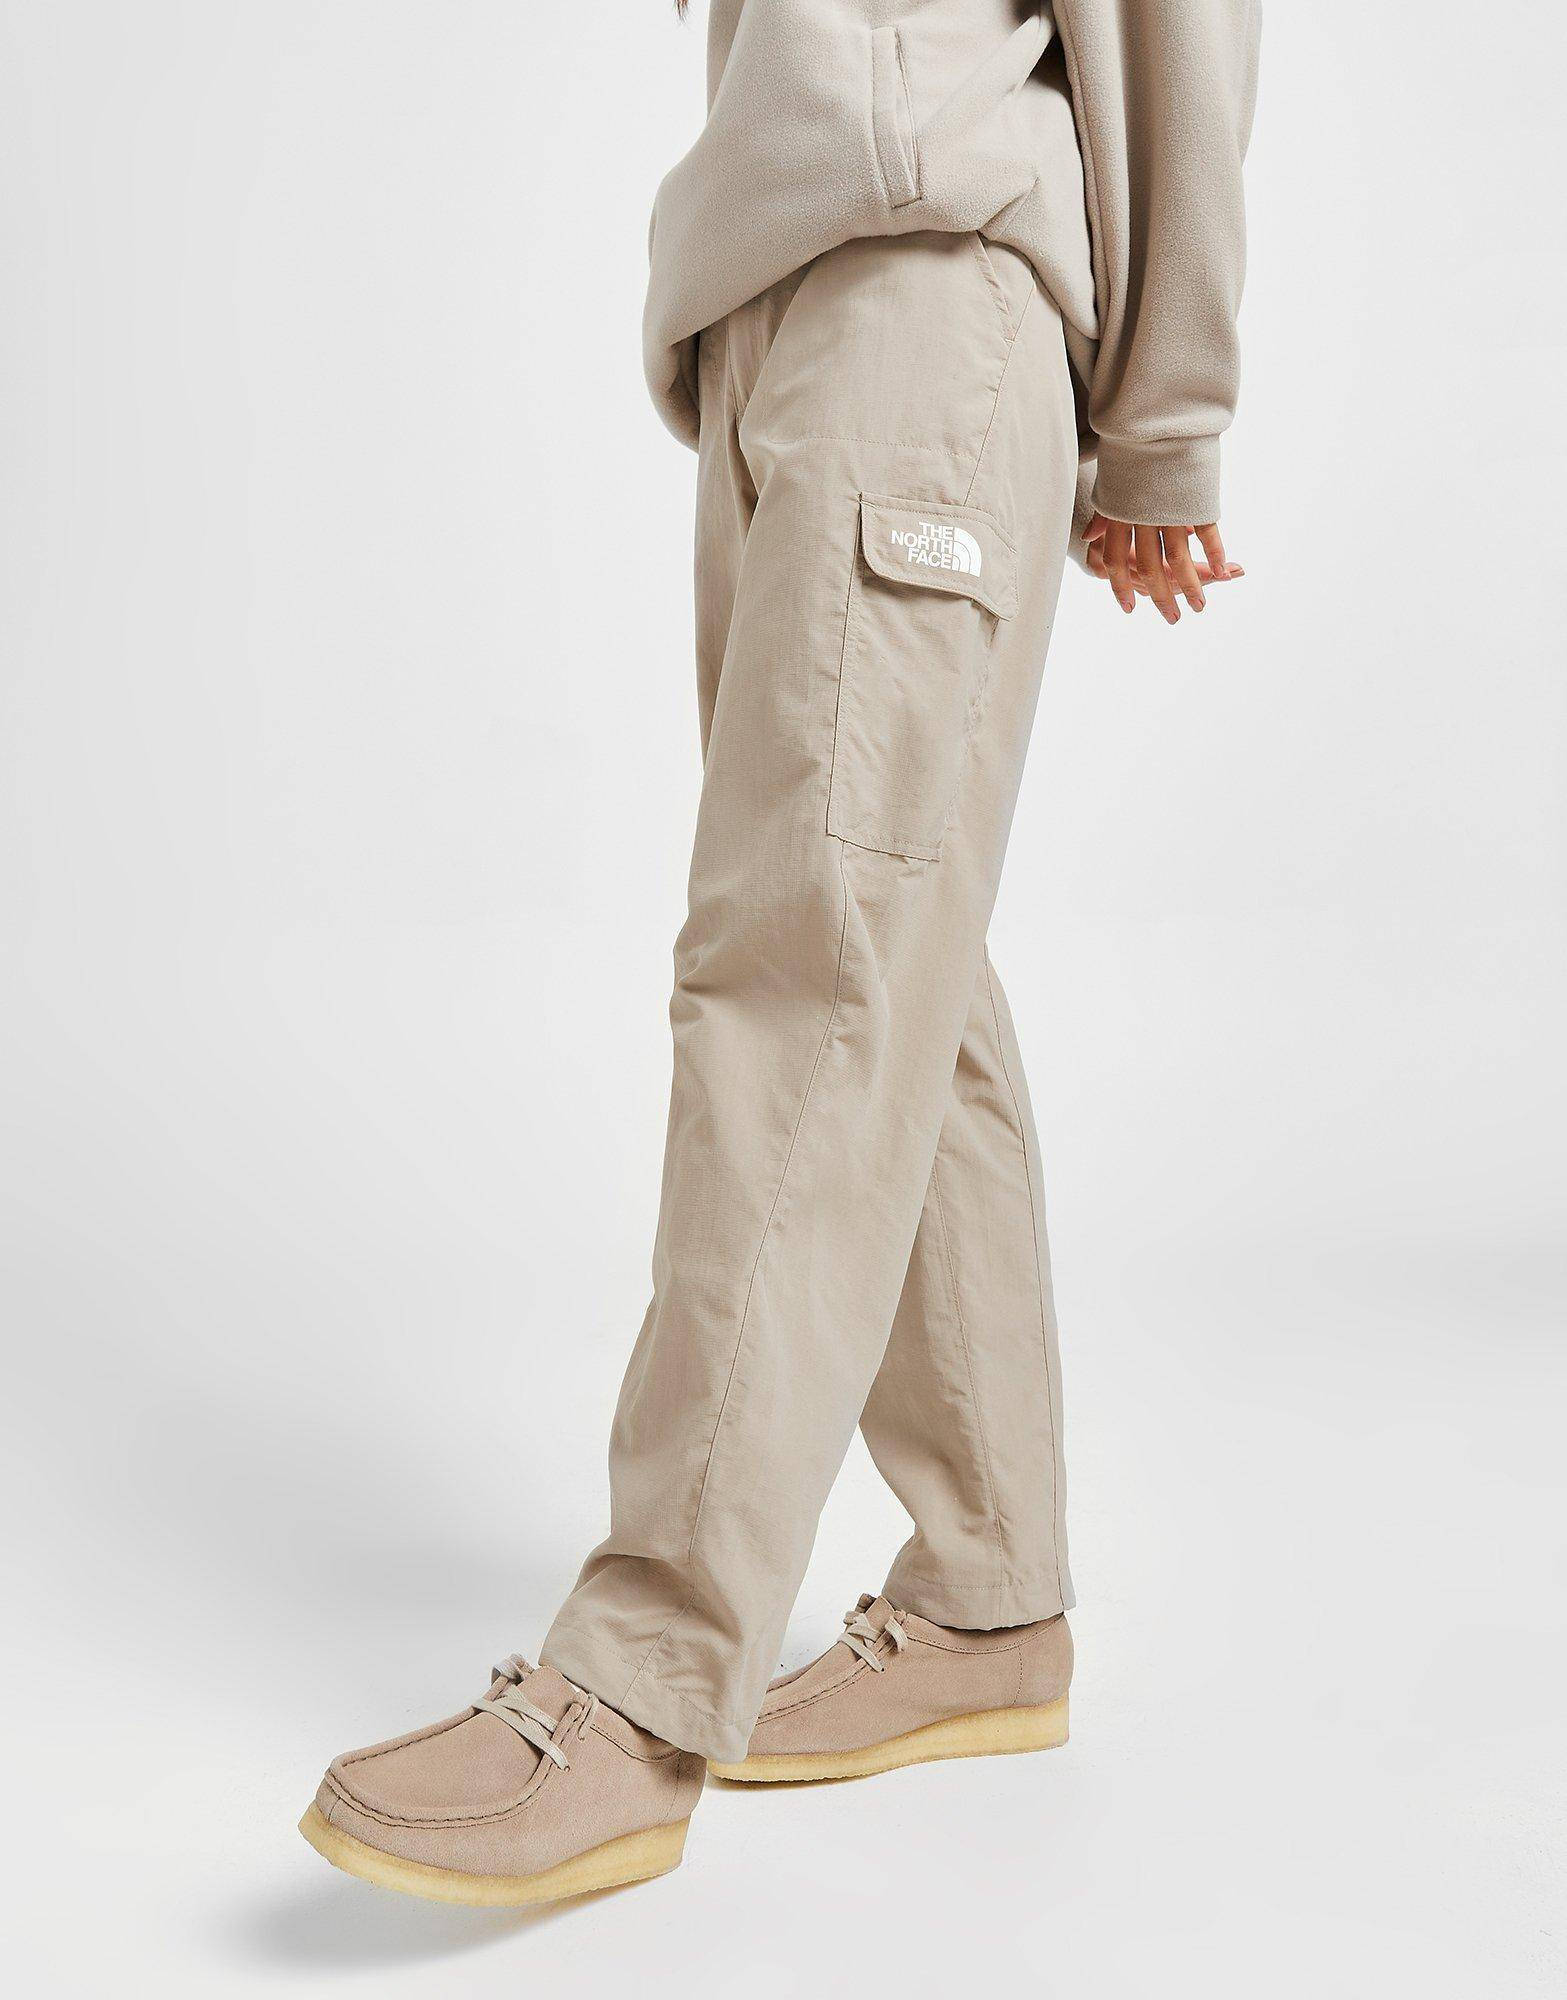 THE NORTH FACE Cargo pants in corduroy in camel